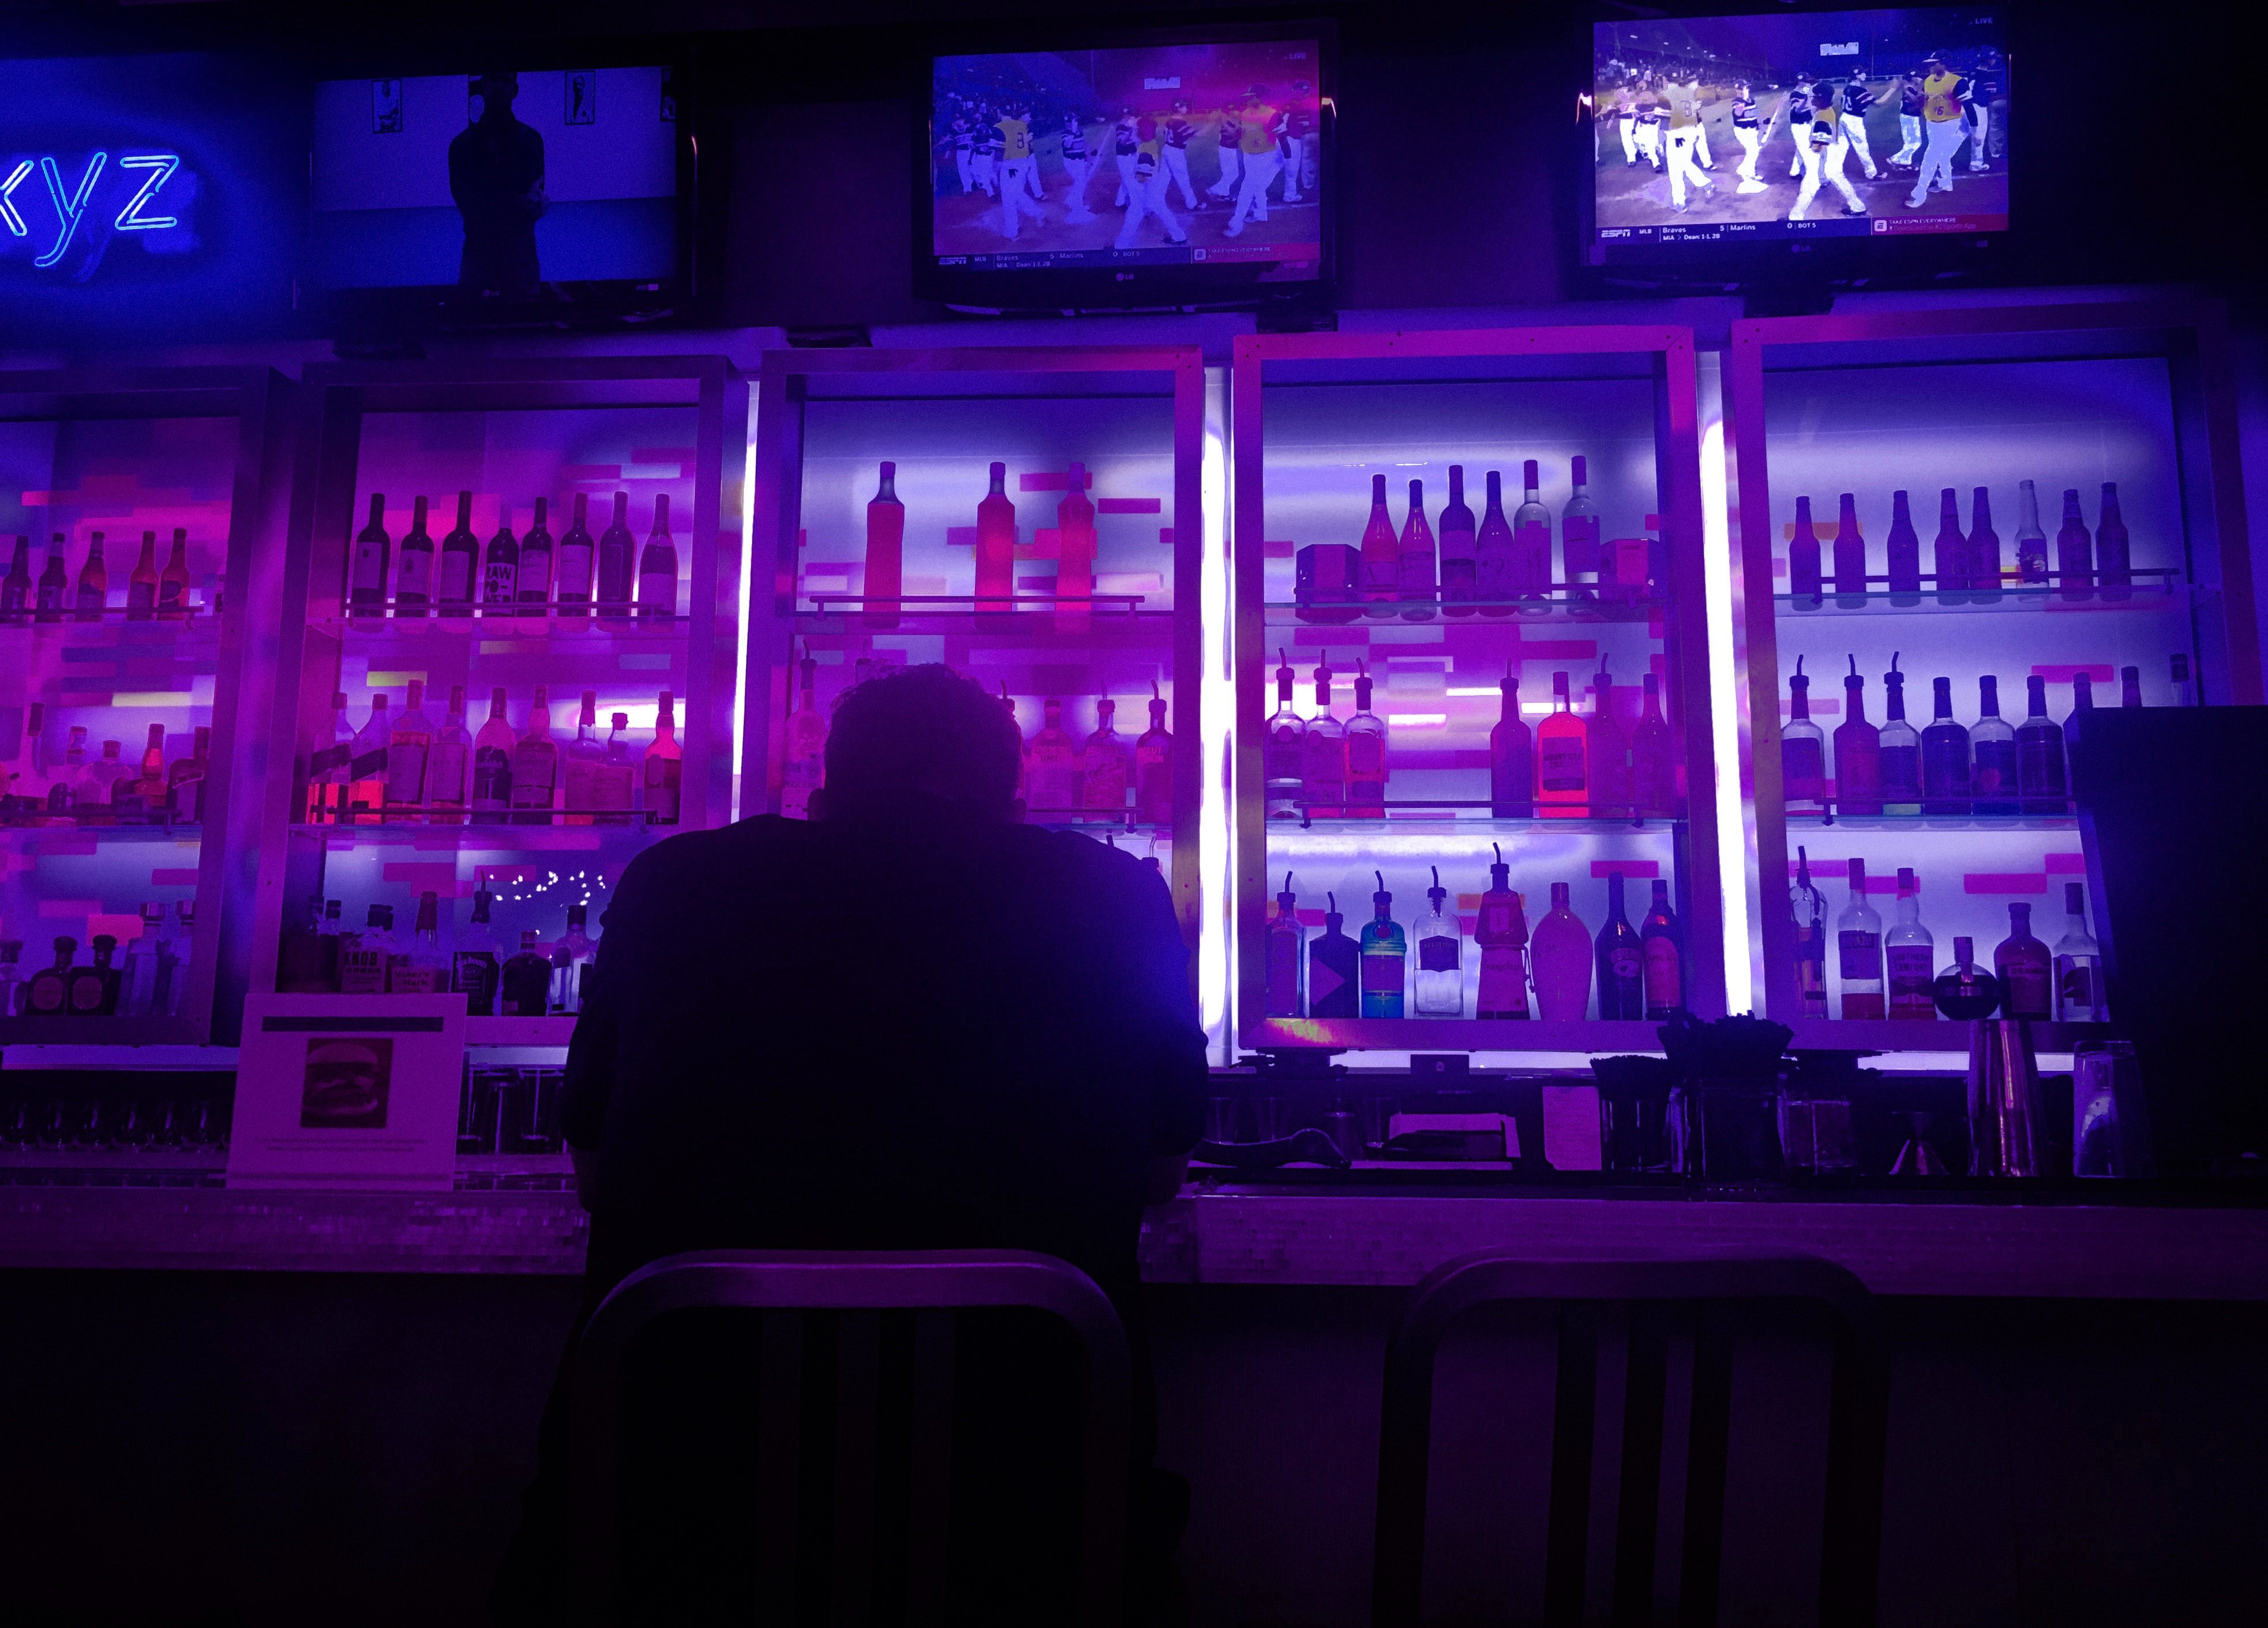 Photo of a person sitting alone at a bar. Their back is toward the camera, and they are hunched over. The bar in front of them is backlit with purple lighting, giving off an interesting glow and showcasing the glass shelves full of alcohol bottles behind the bar.